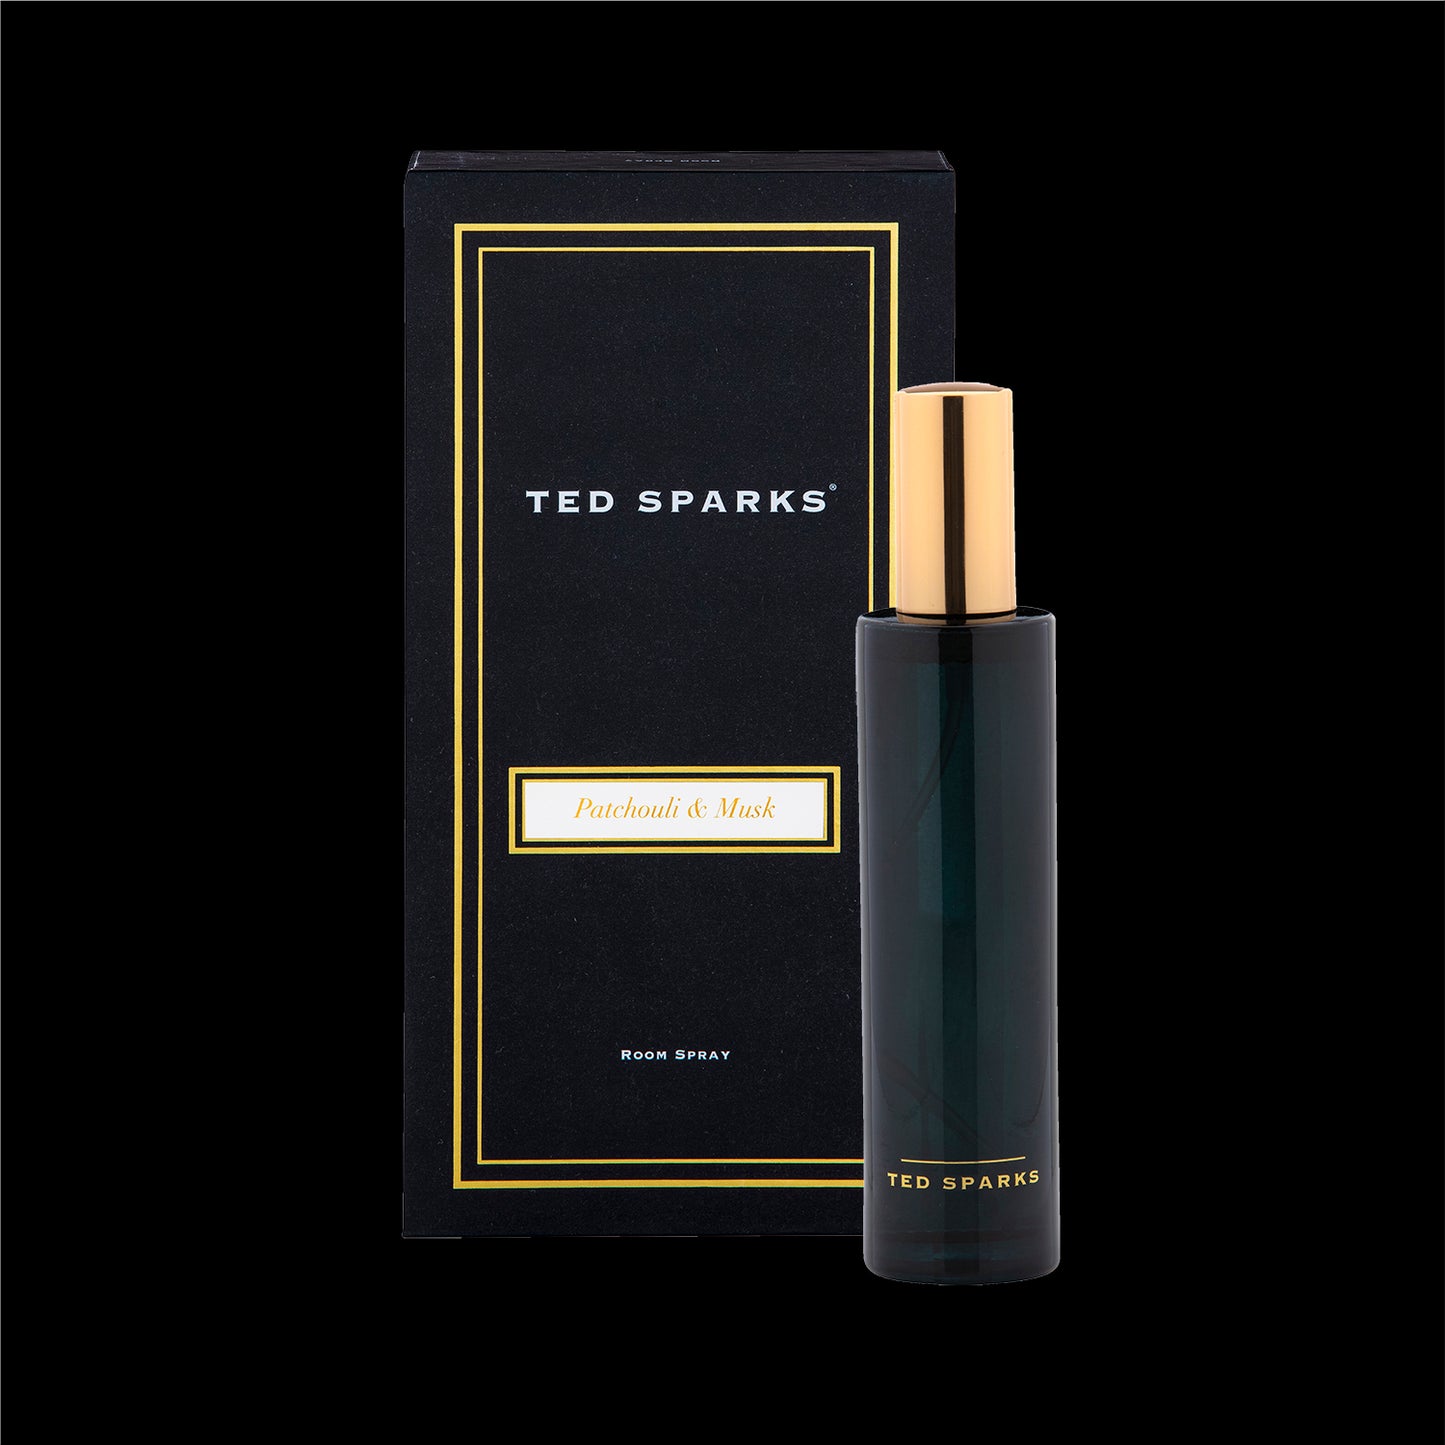 TED SPARKS - Room Spray - Patchouli & Musk